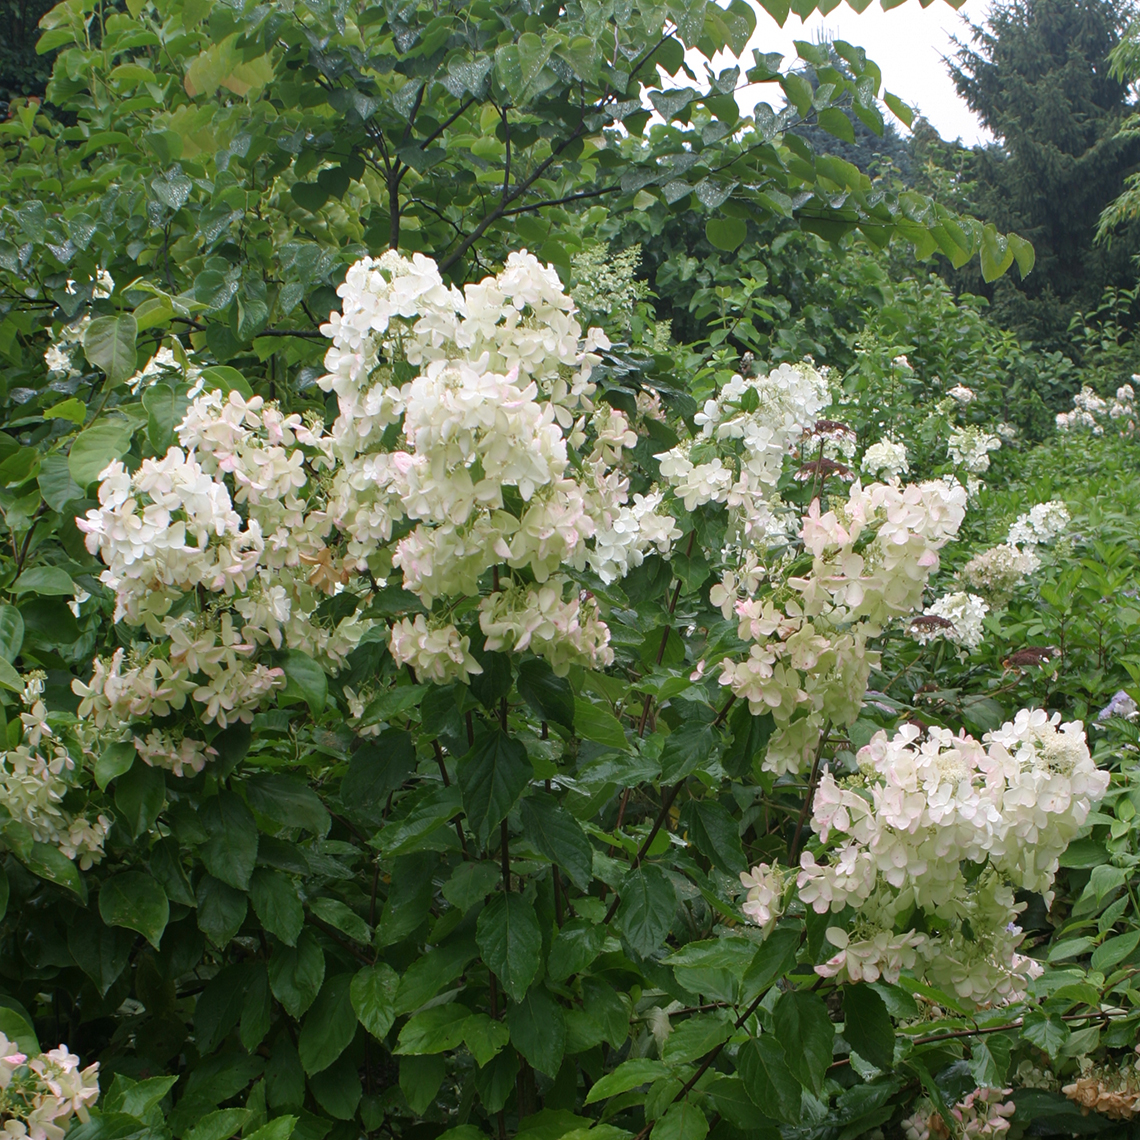 Polar Ball panicle hydrangea in bloom showing its very large inflorescences